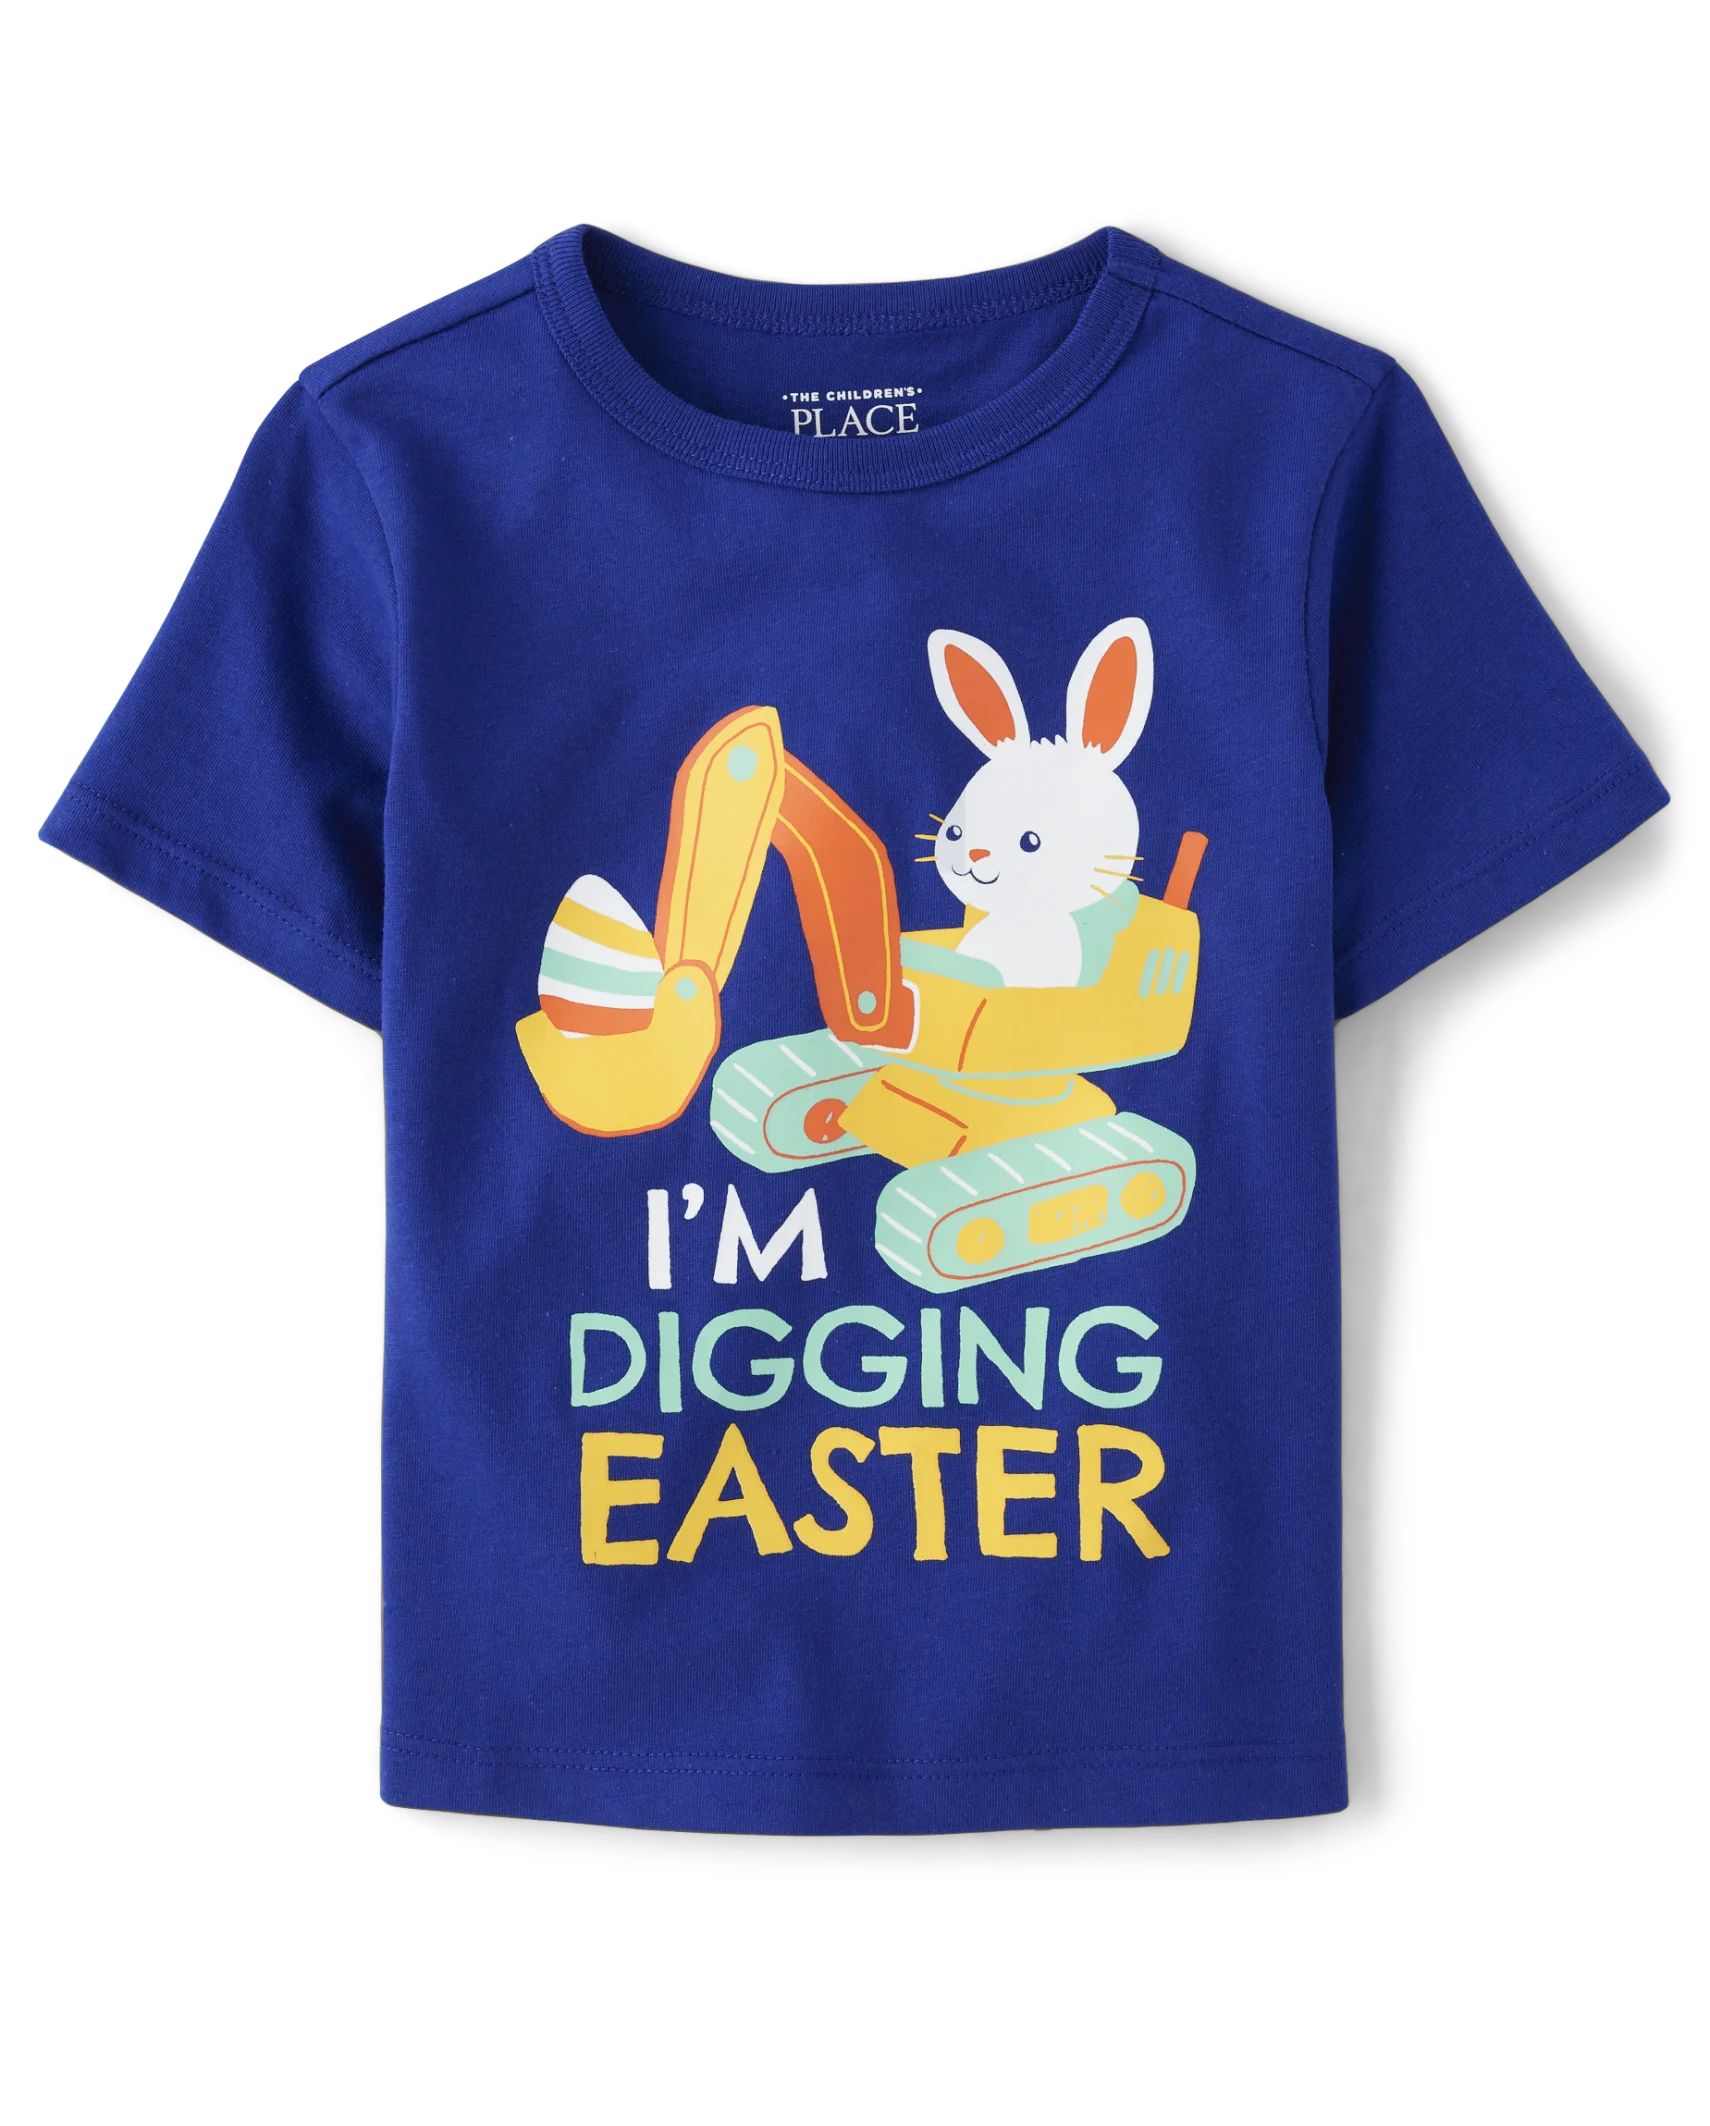 Baby And Toddler Boys Digging Easter Graphic Tee - navy narrows | The Children's Place